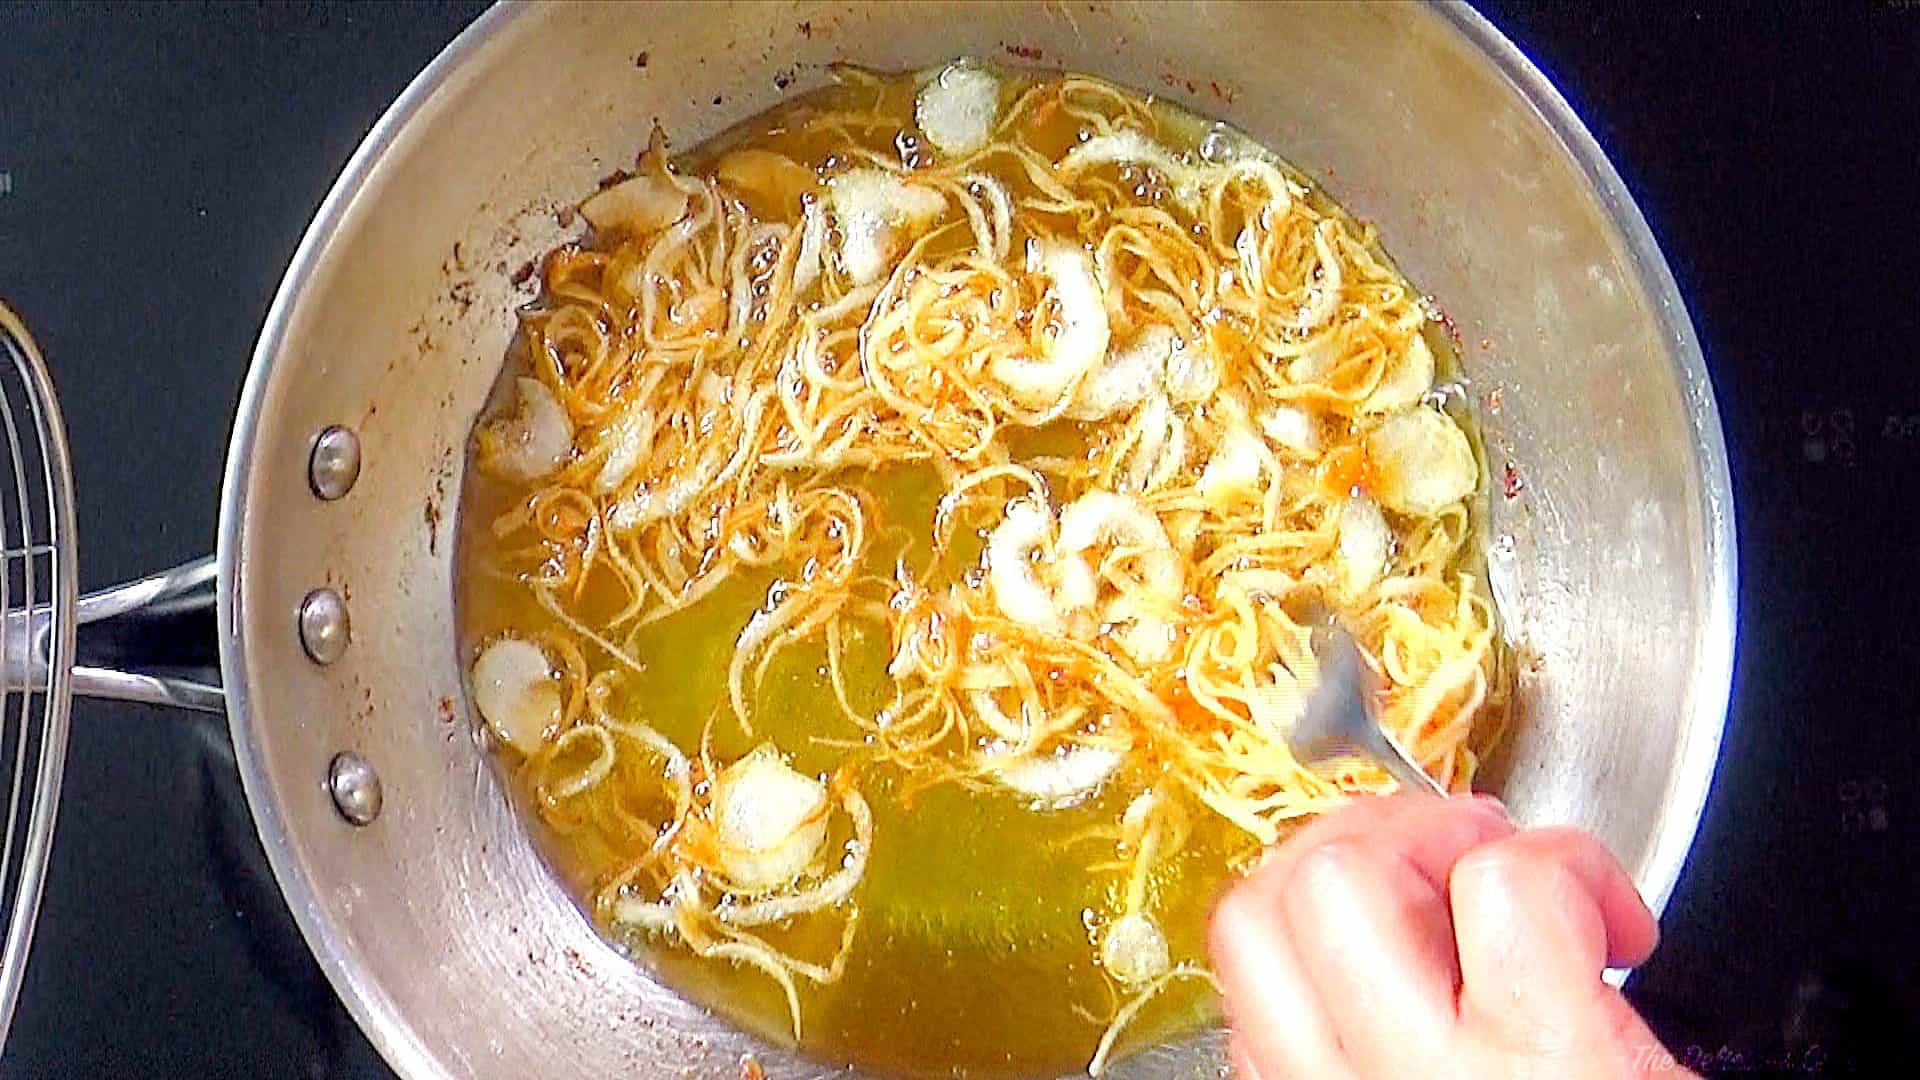 Frying onions for the recipe.